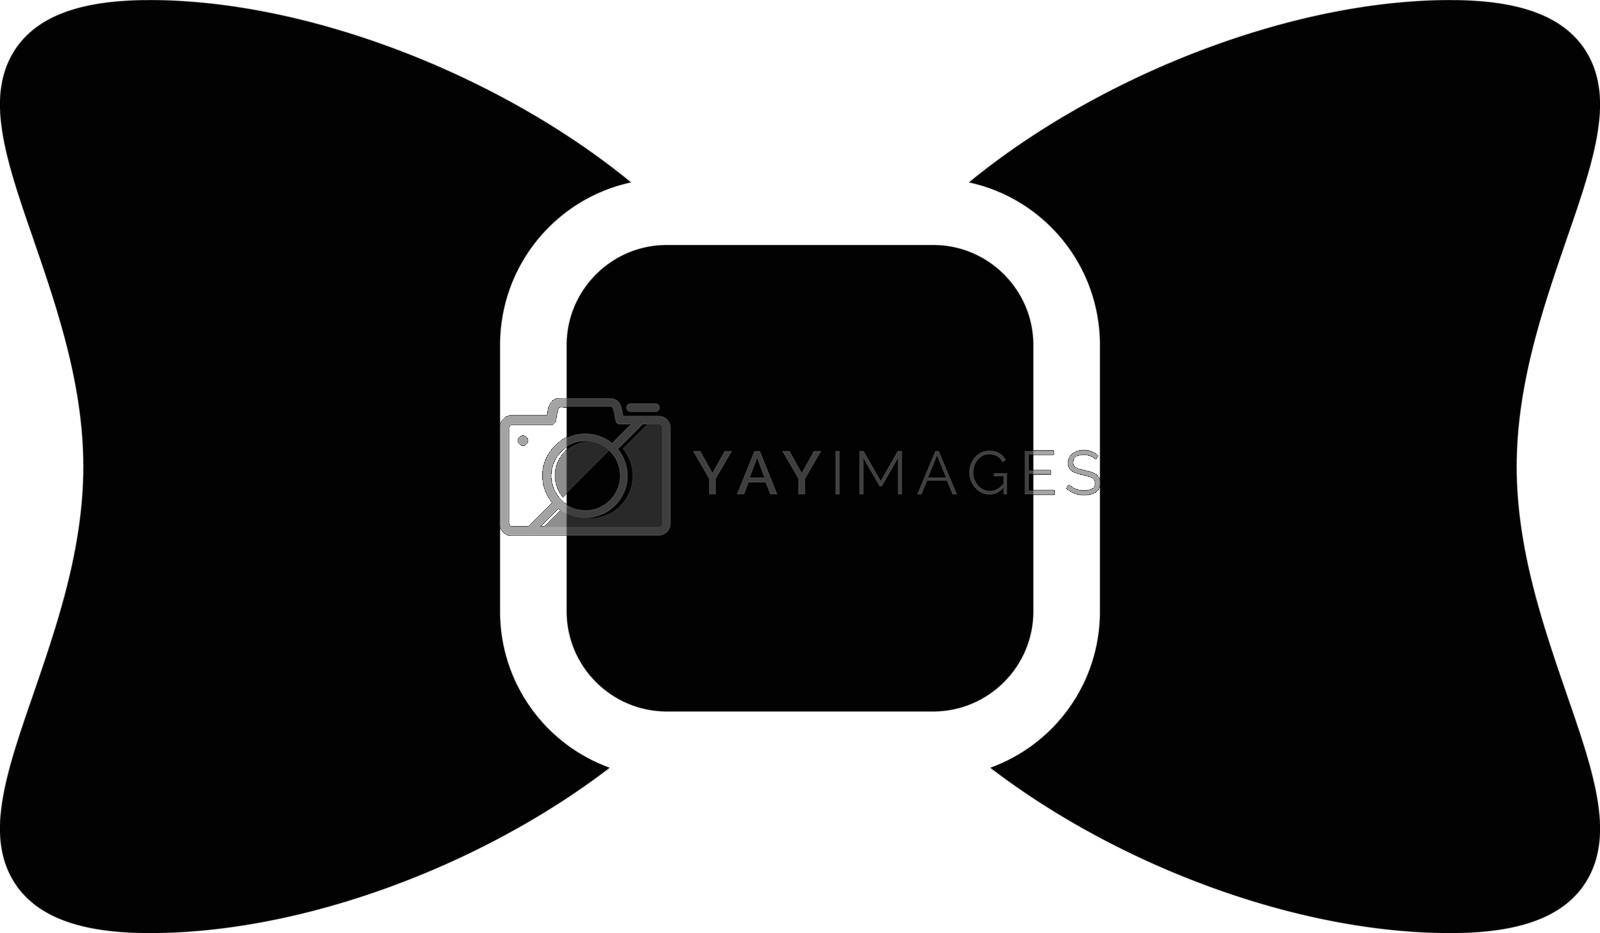 Royalty free image of bow by FlaticonsDesign